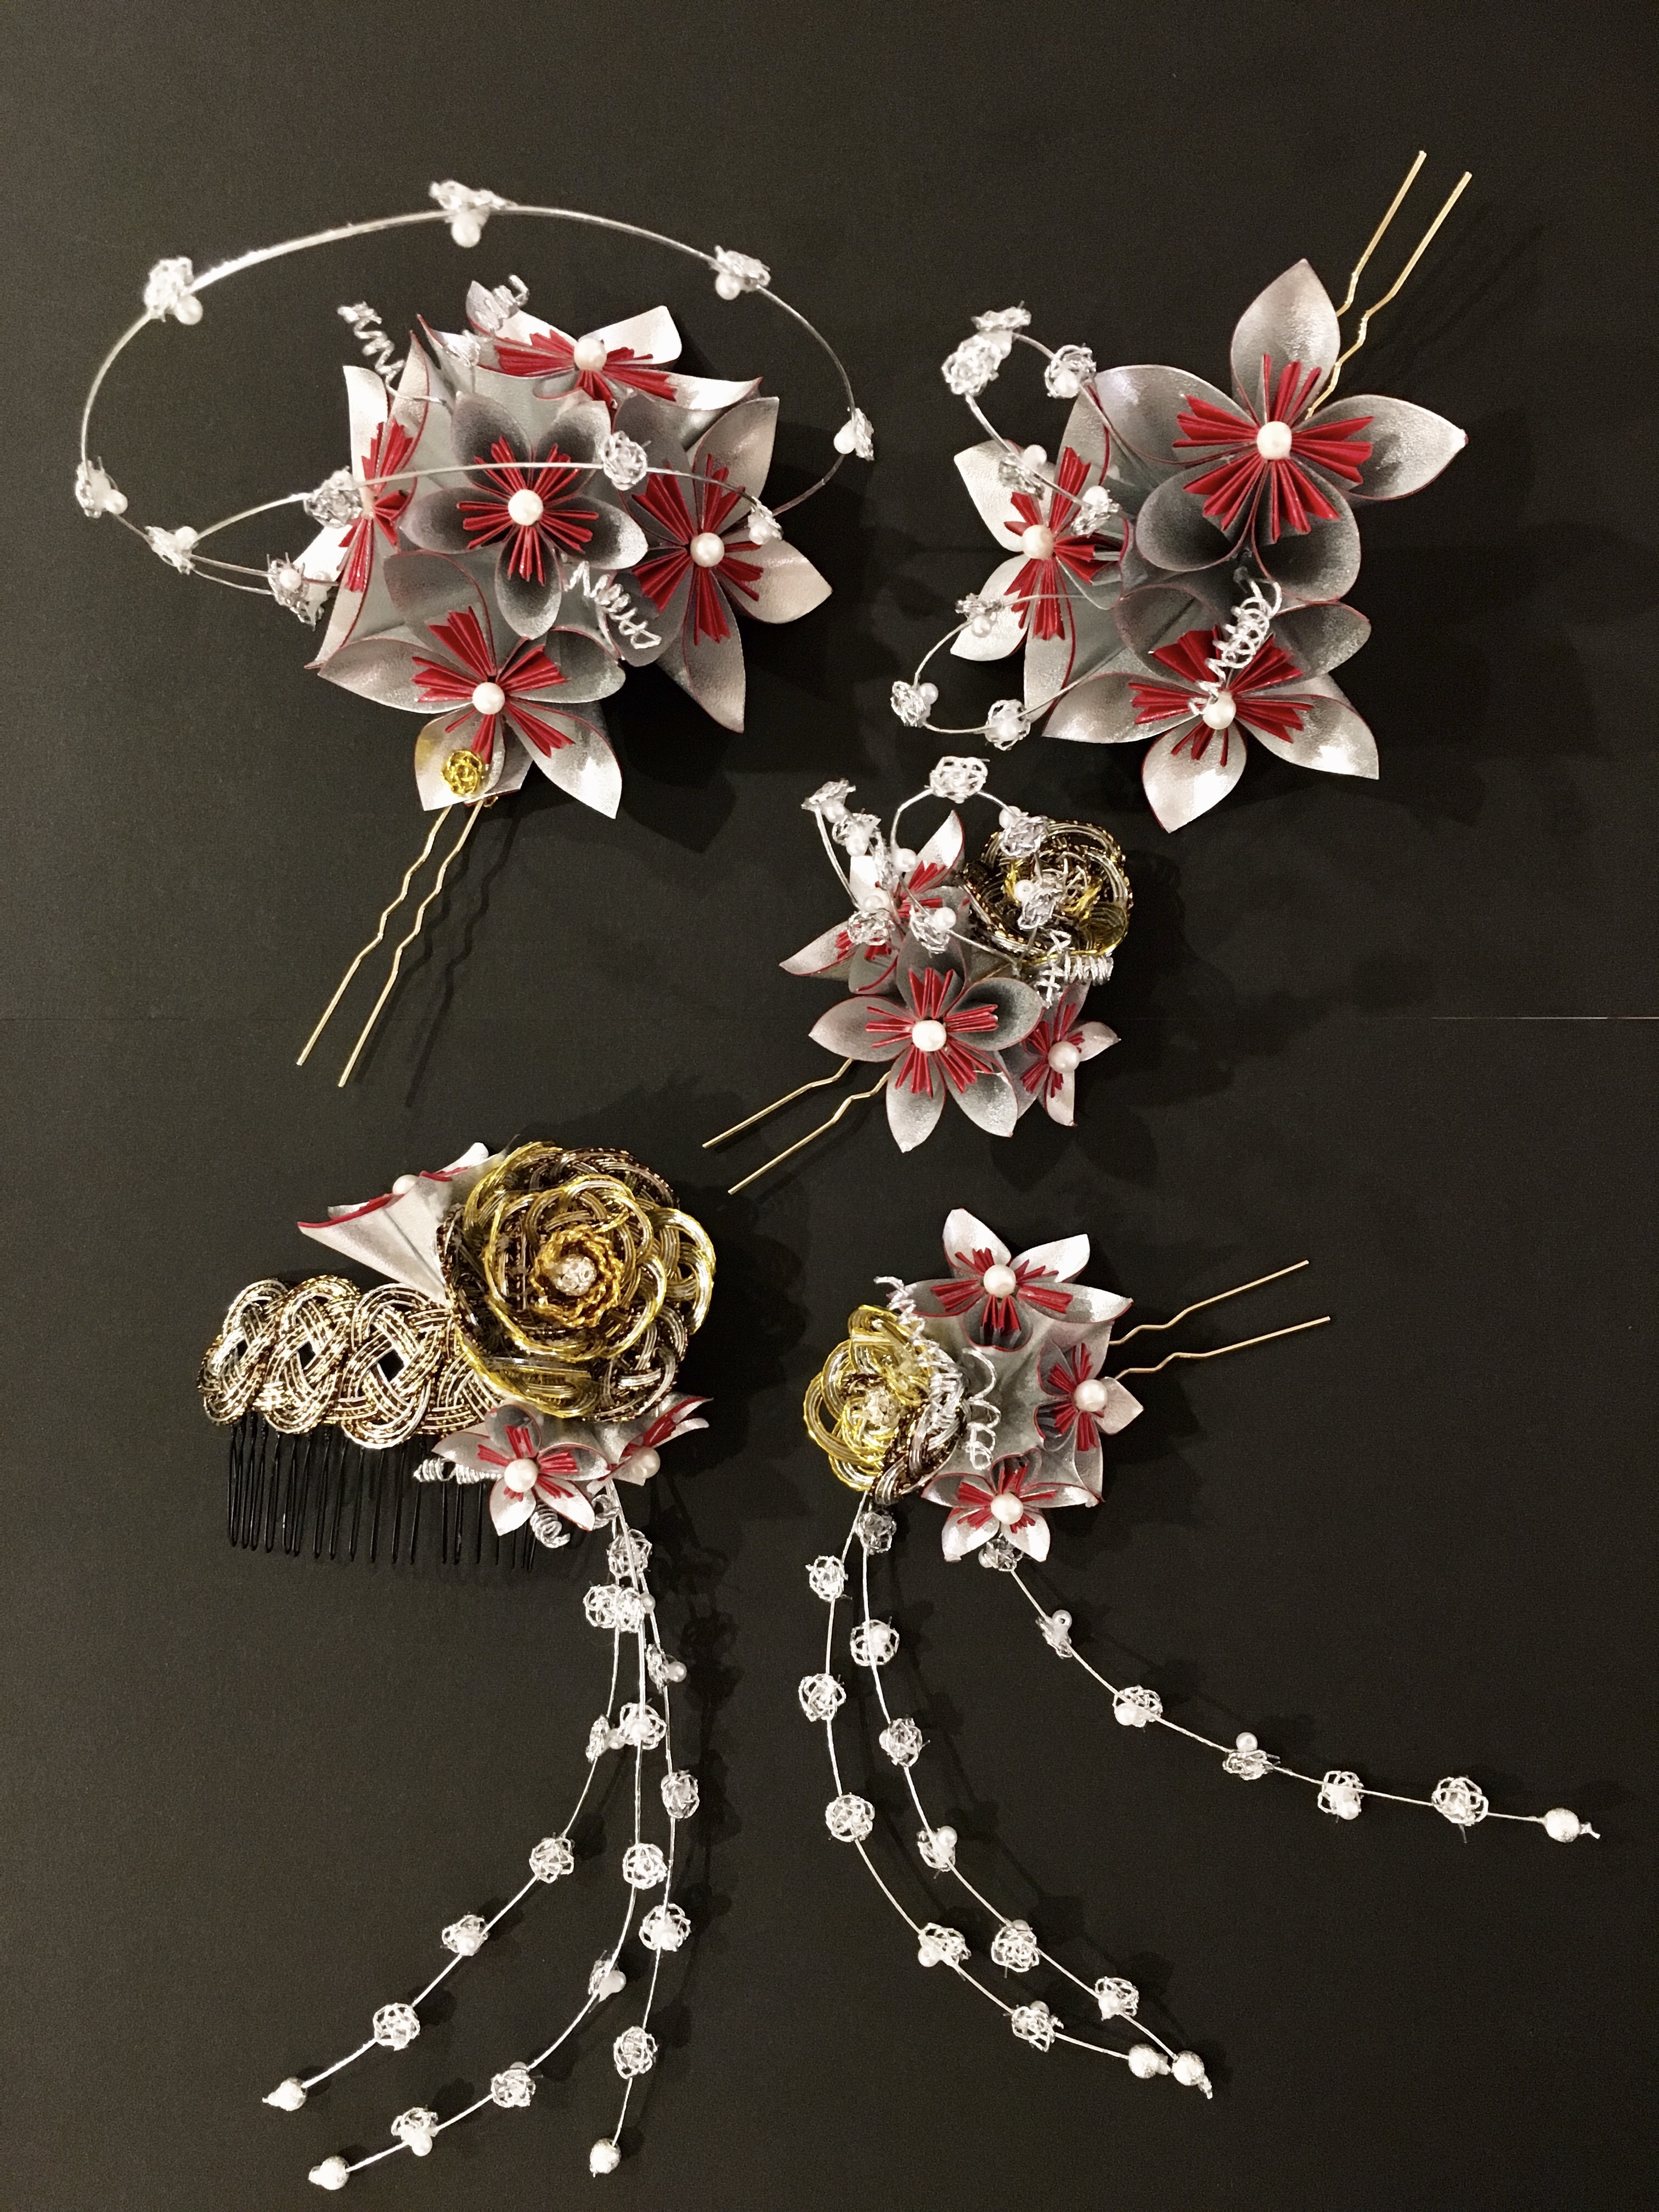 Our handmade “Kanzashi” – Japanese traditional hair accessories | Connect  Japan and the world by sharing Japanese culture, art, jewelry, food｜ Japan  Cross Bridge｜Tokyo